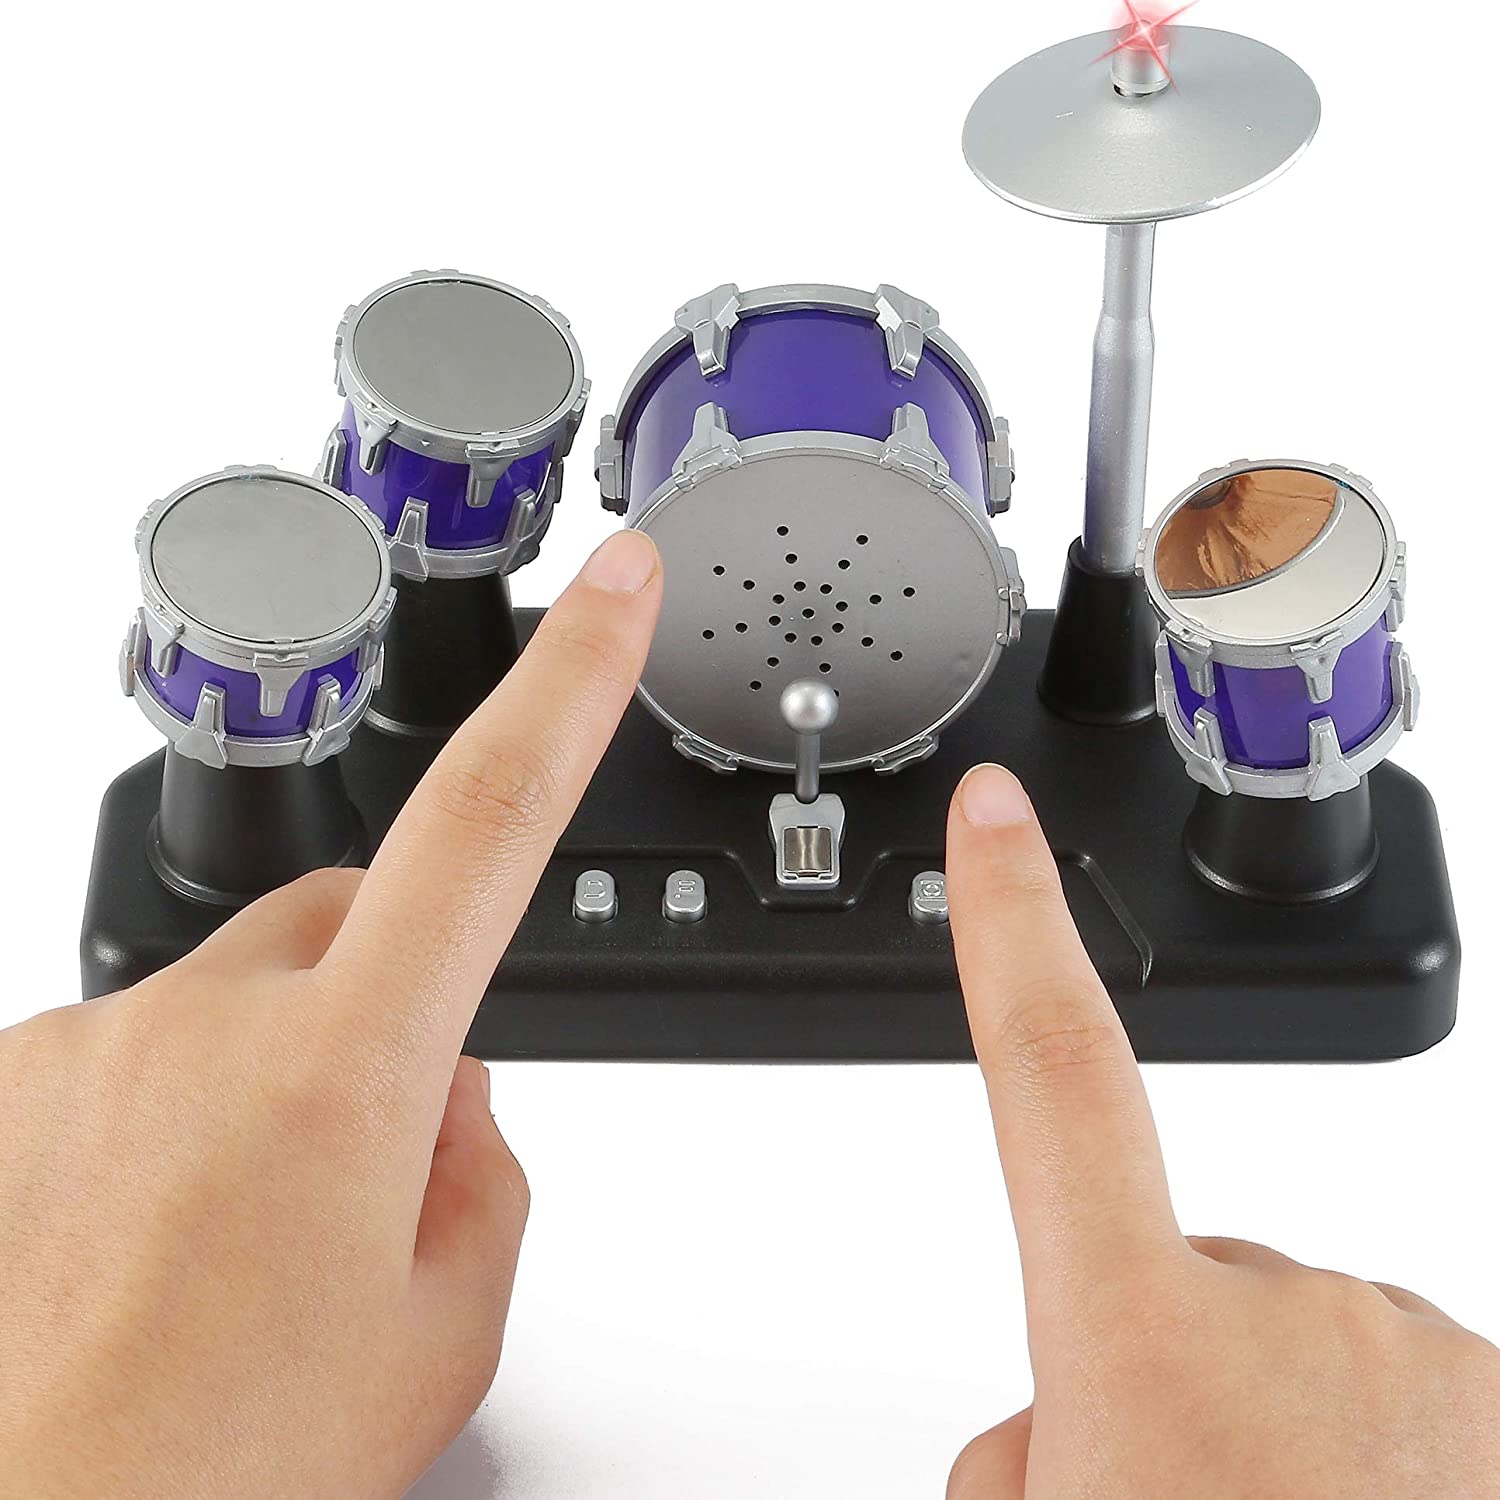 A person is using two fingers to play on a mini finger desktop drum set.